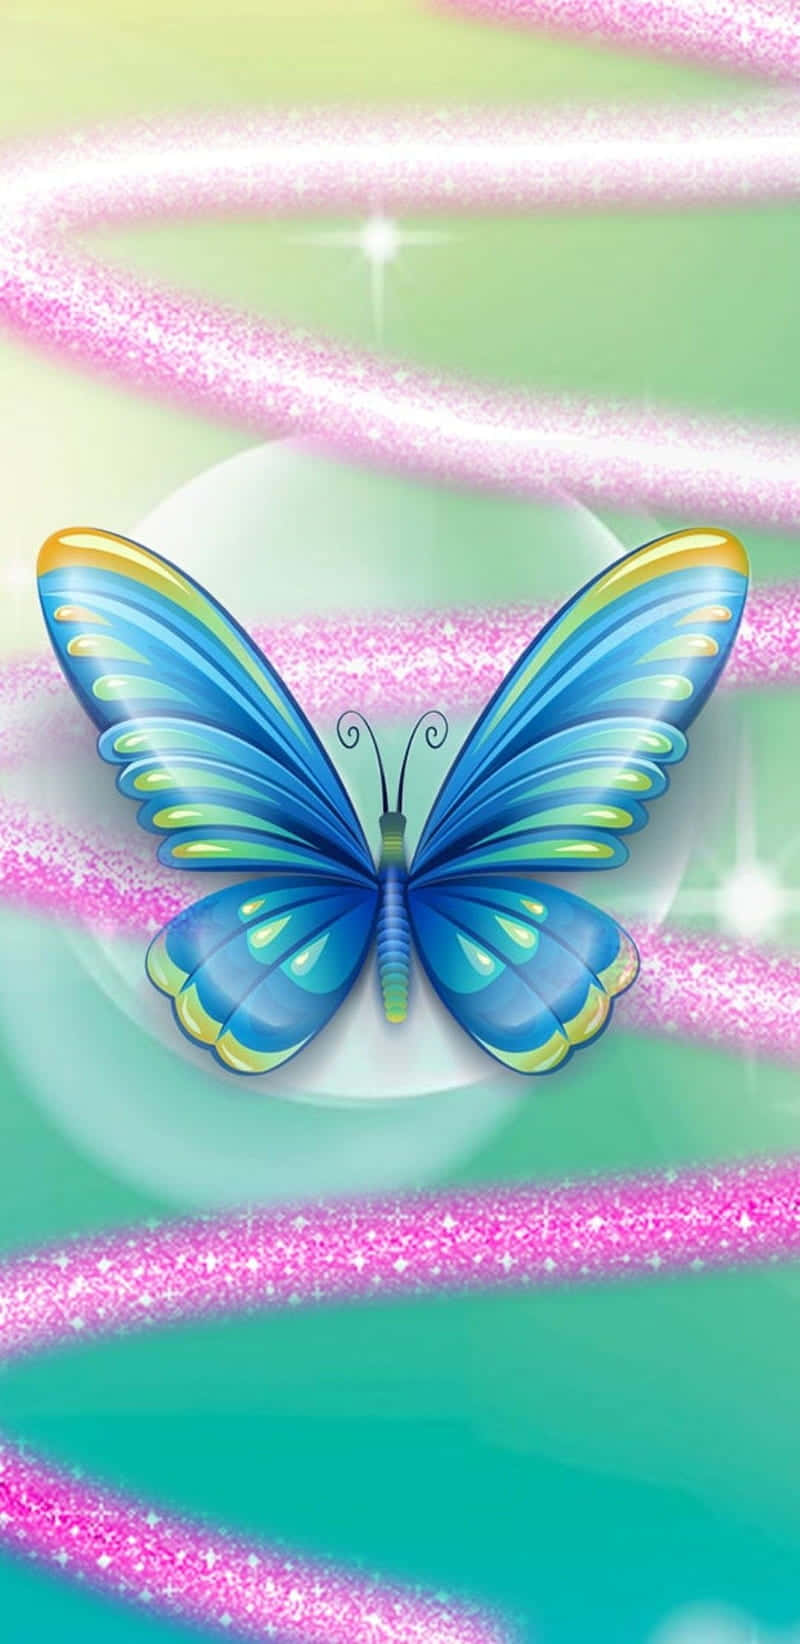 "Sparkling in beauty, the glitter butterfly adds a magical touch to the world around it." Wallpaper